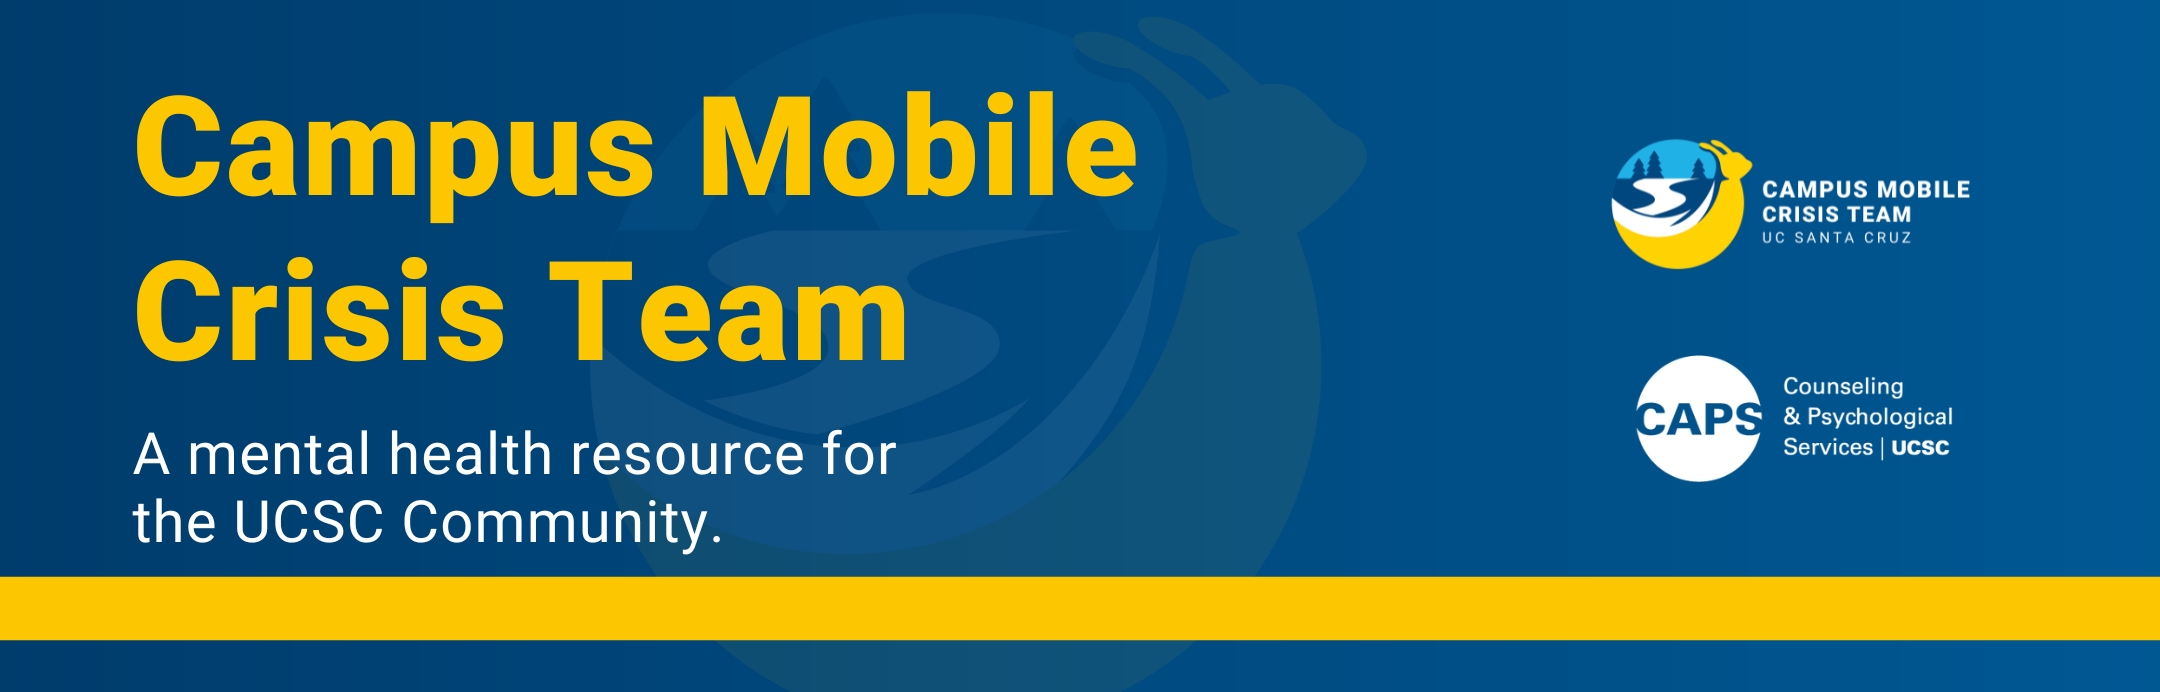 Campus Mobile Crisis Team - A new resource for the UCSC Community.